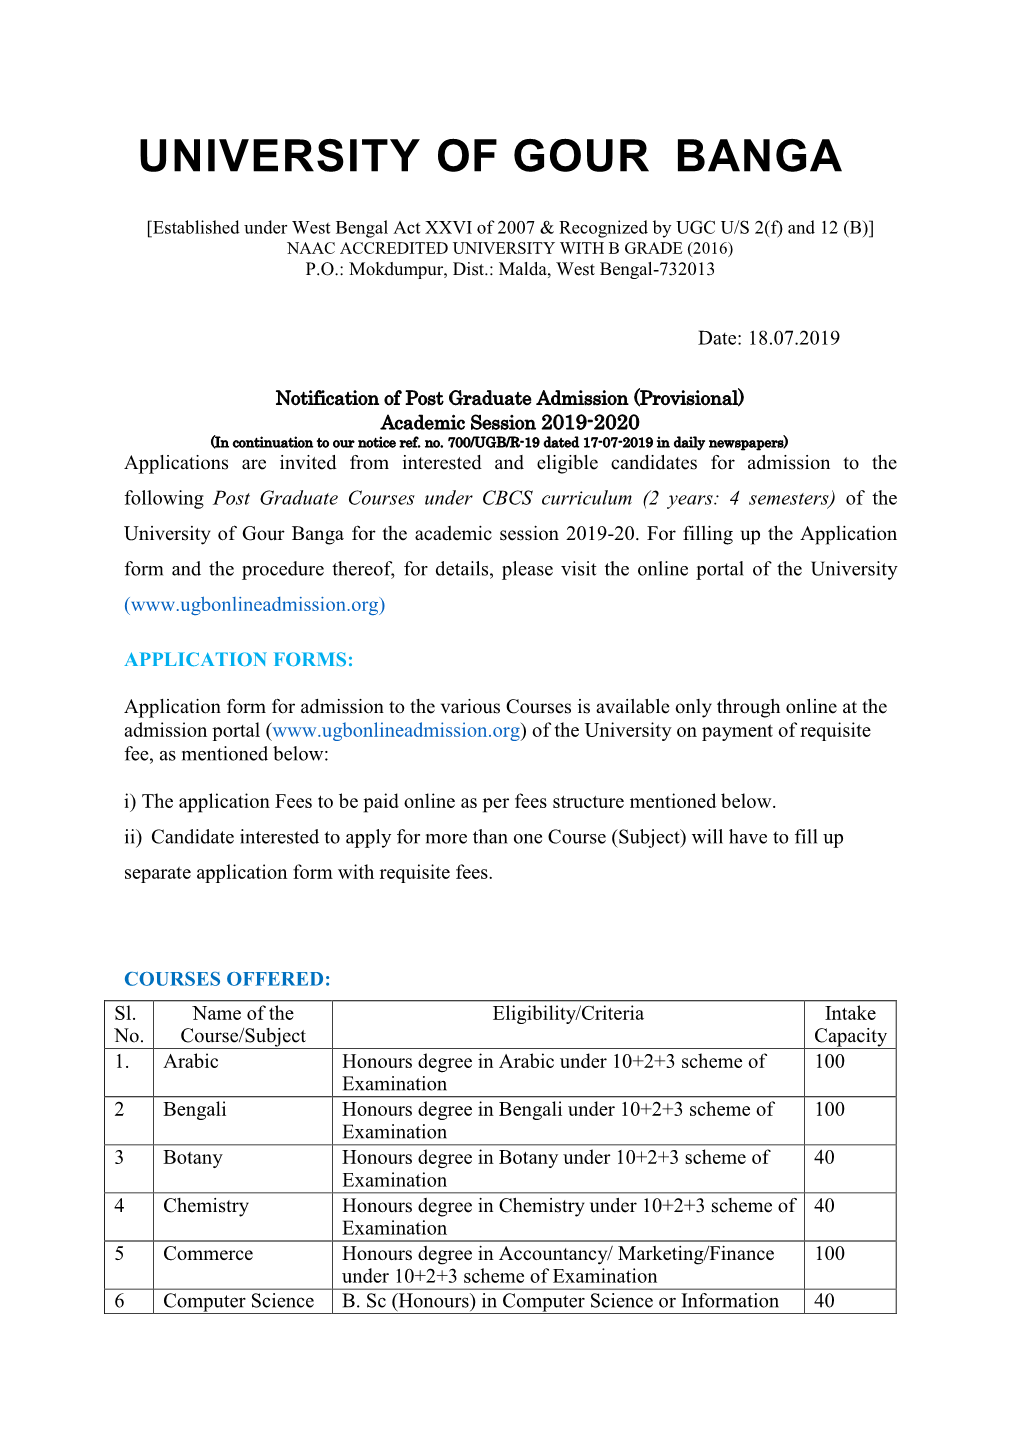 Notification of Post Graduate Admission (Provisional) Academic Session 2019-2020 (In Continuation to Our Notice Ref